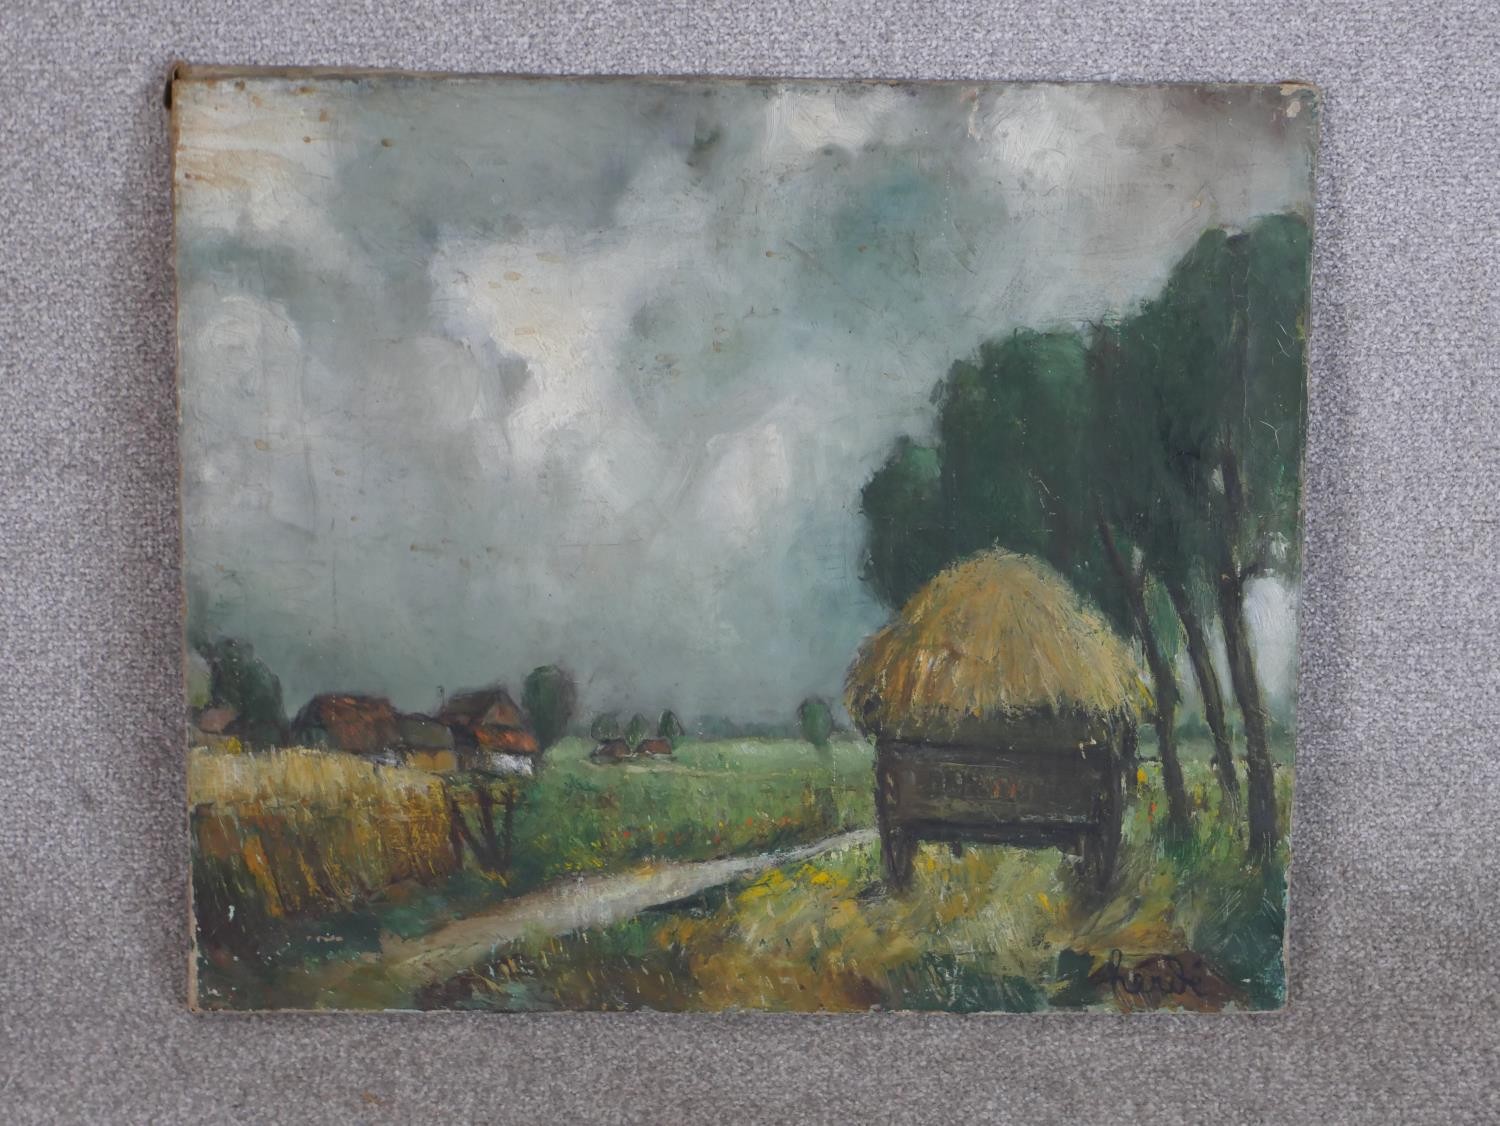 Rende, 20th century, Straw laden trailer on a track with village behind, oil on canvas, signed and